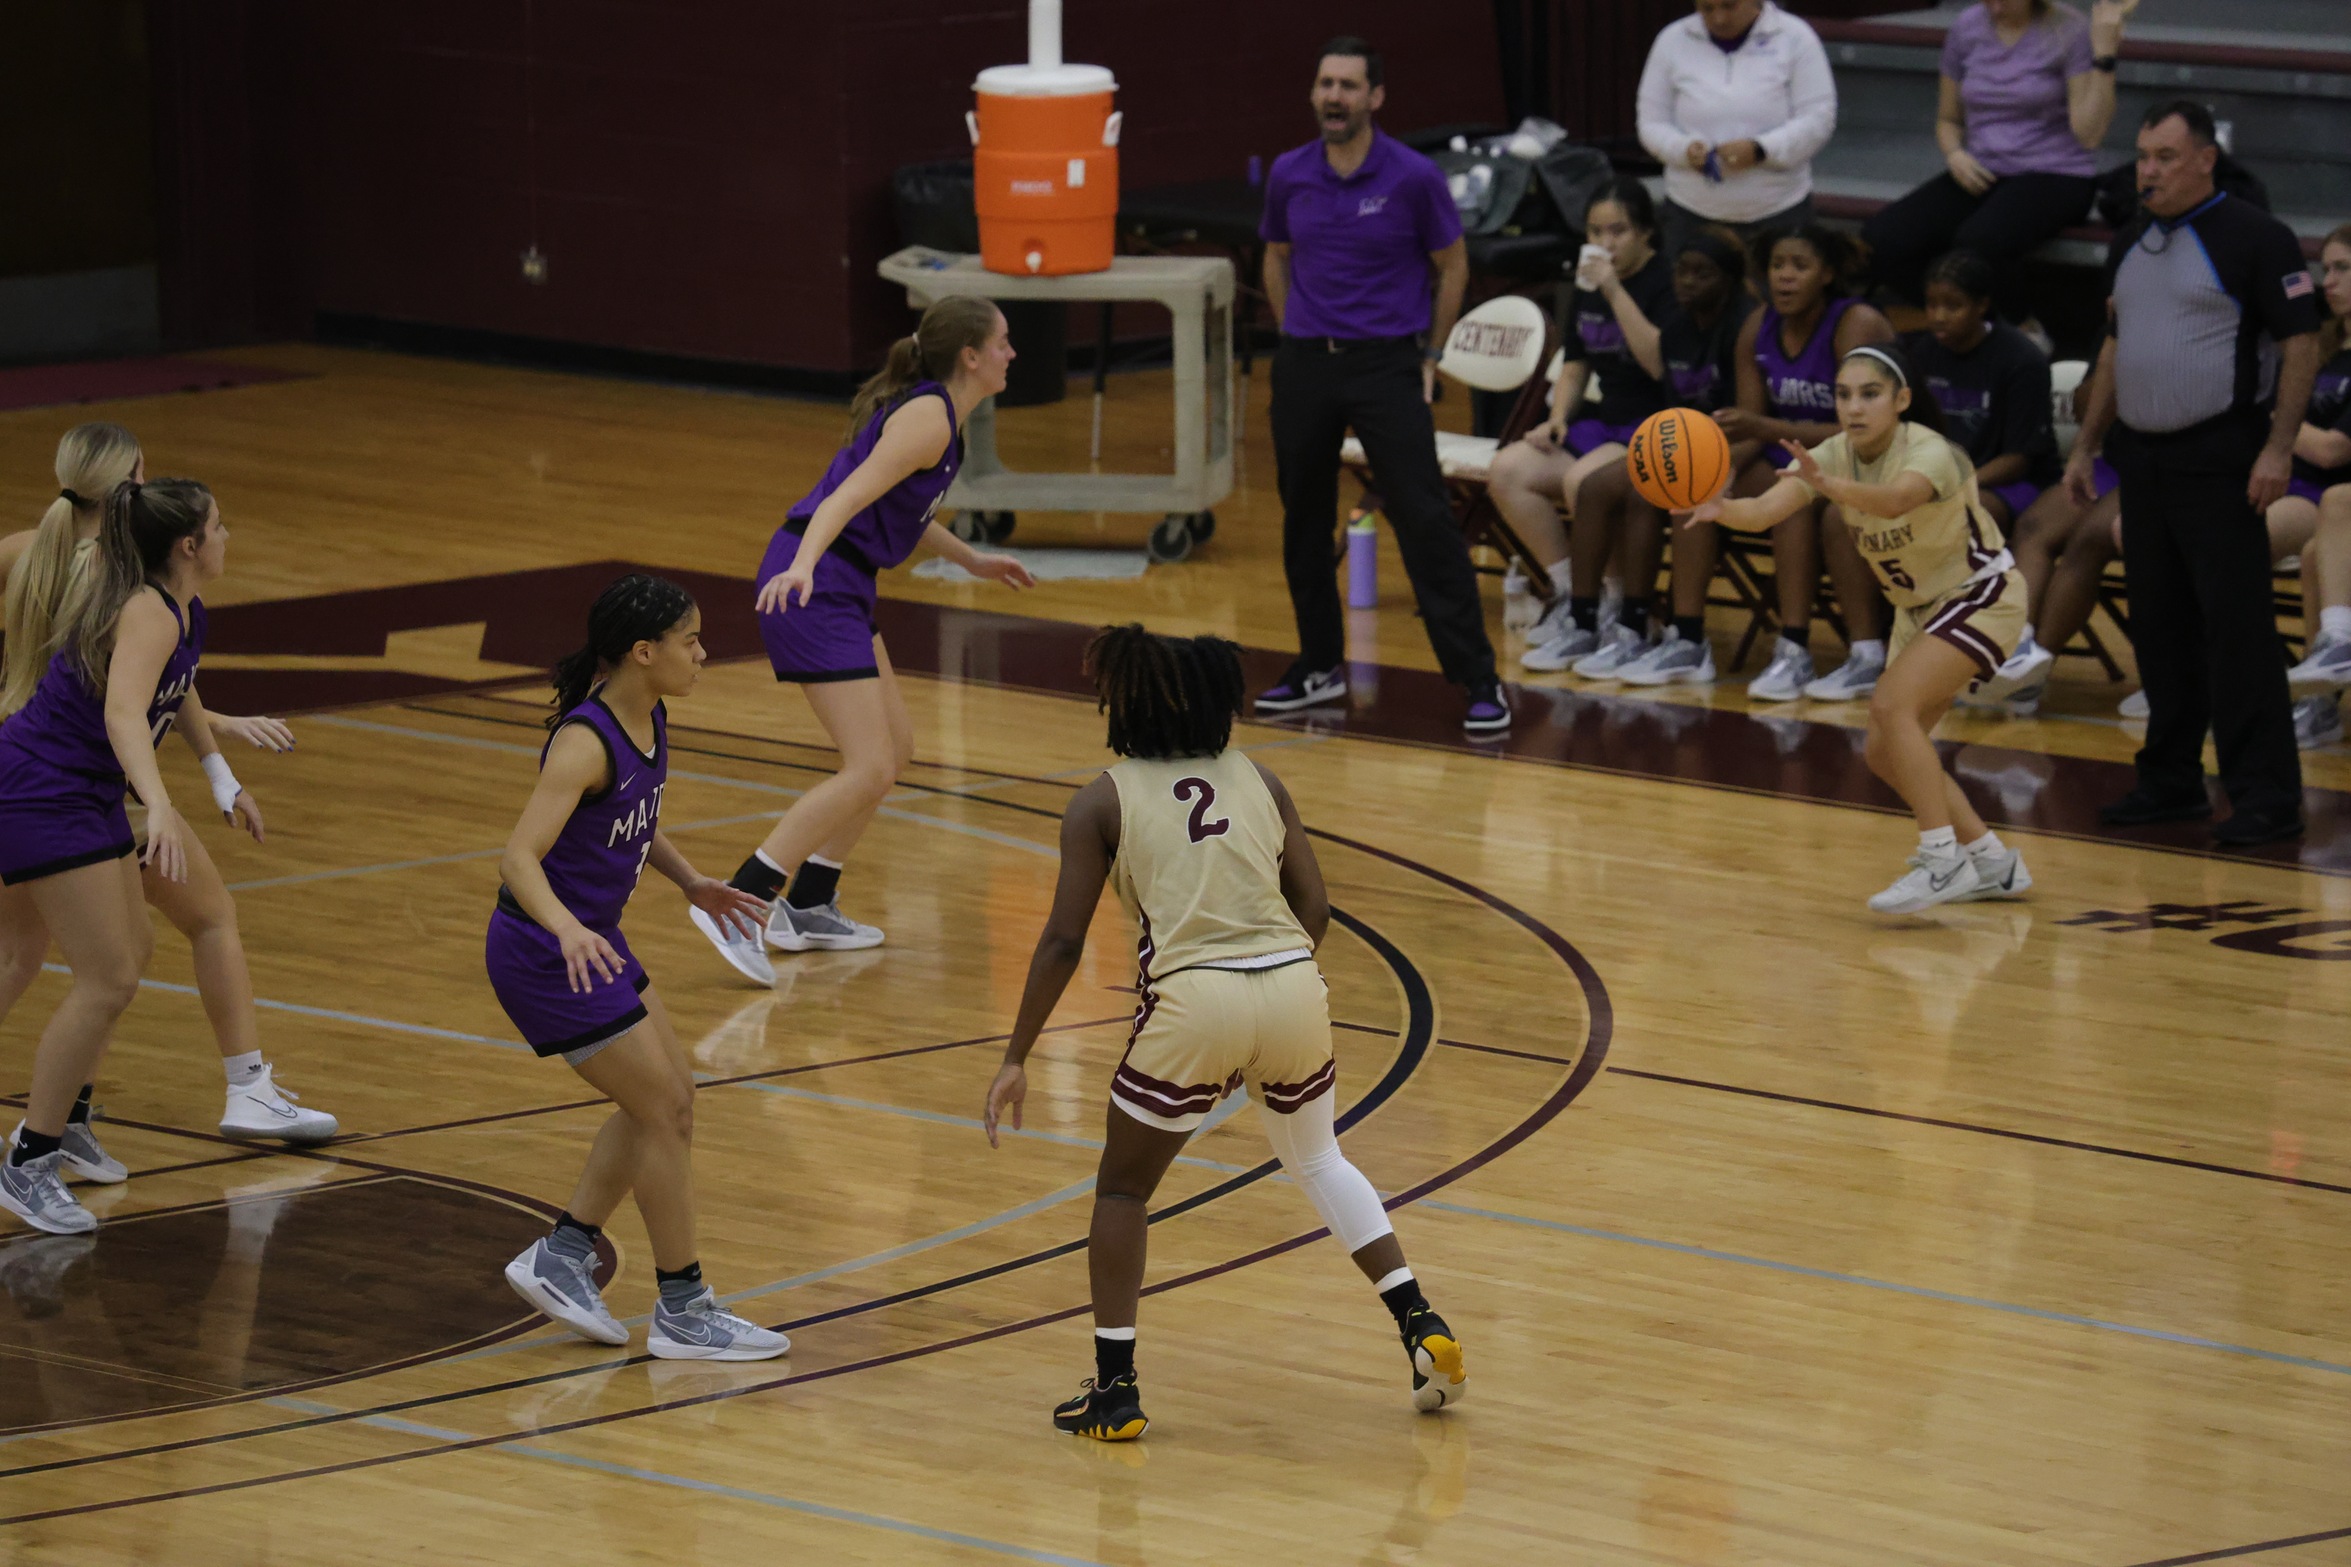 The Ladies fell to Millsaps for the second time in four days on Wednesday.